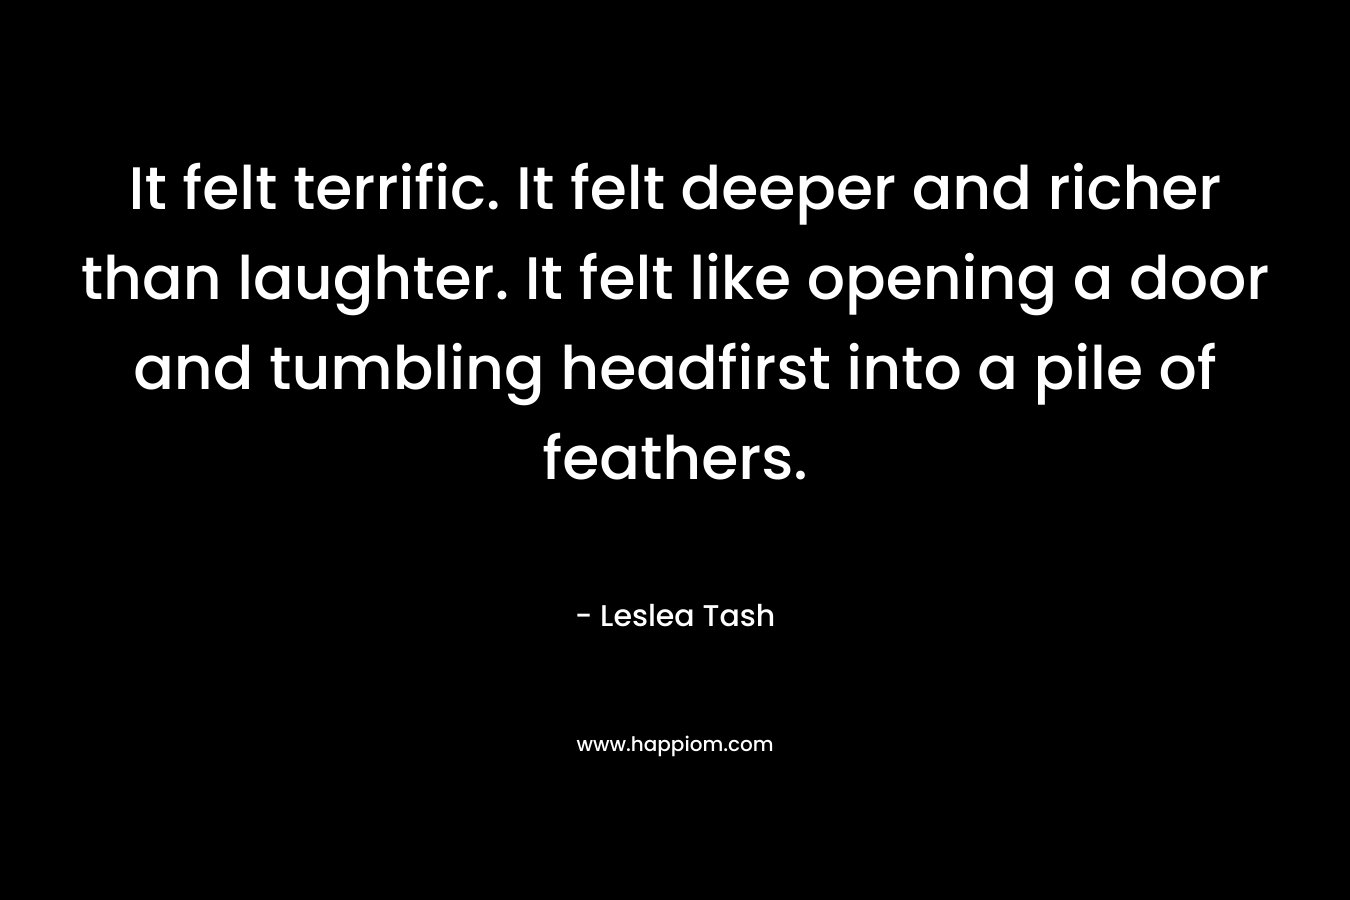 It felt terrific. It felt deeper and richer than laughter. It felt like opening a door and tumbling headfirst into a pile of feathers. – Leslea Tash